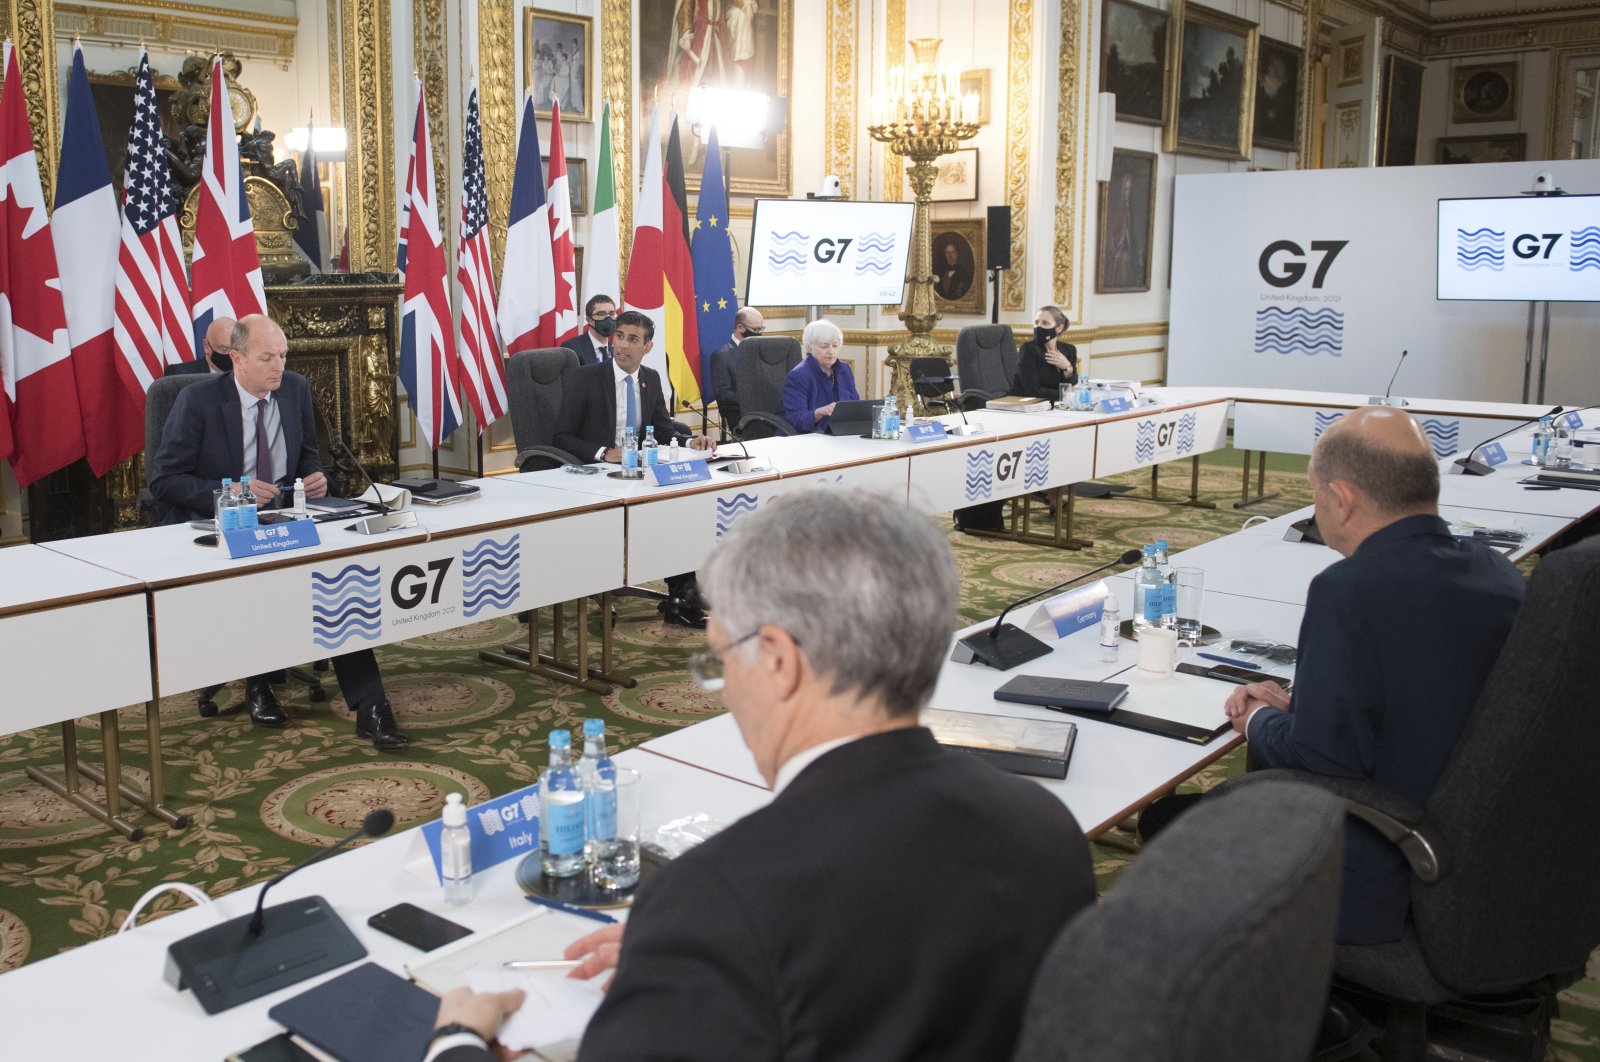 Britain's Chancellor of the Exchequer Rishi Sunak, back center, and U.S. Treasury Secretary Janet Yellen, center right, at a meeting of finance ministers from across the G-7 nations at Lancaster House in London, U.K., June 4, 2021. (Pool via AP)